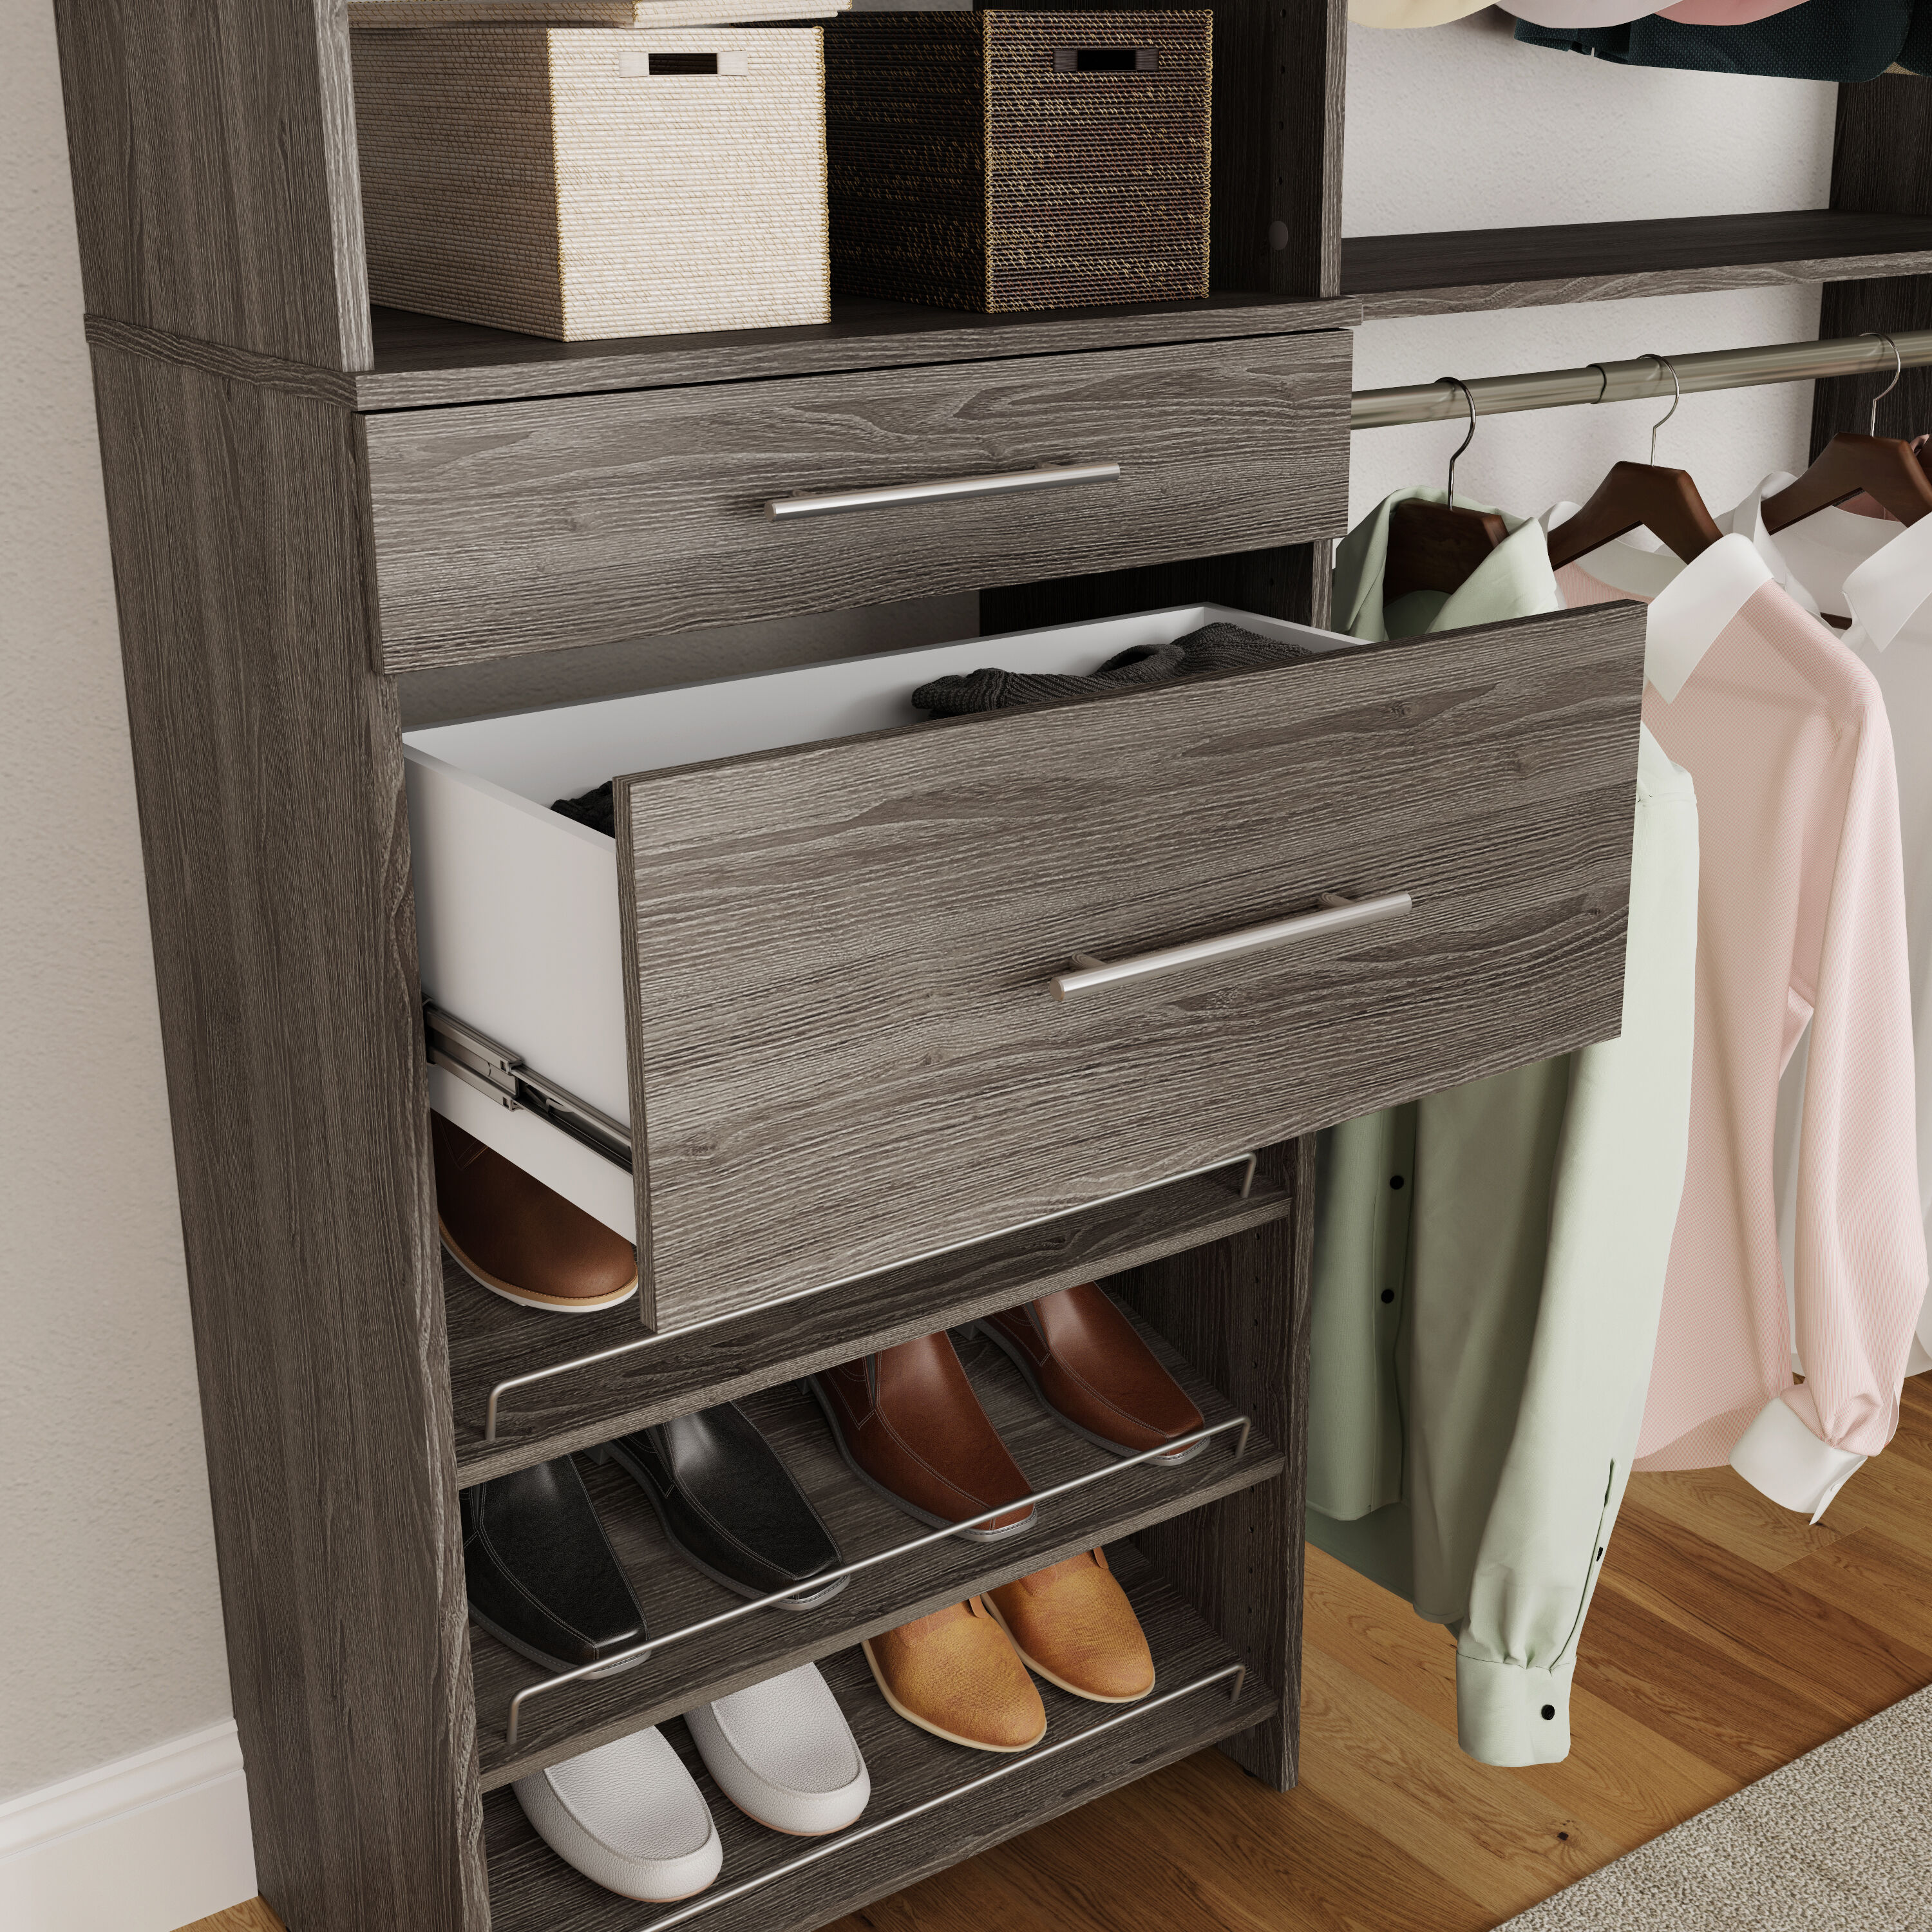 ClosetMaid BrightWood 25in x 10in x 13in Ash Drawer Unit in the Wood